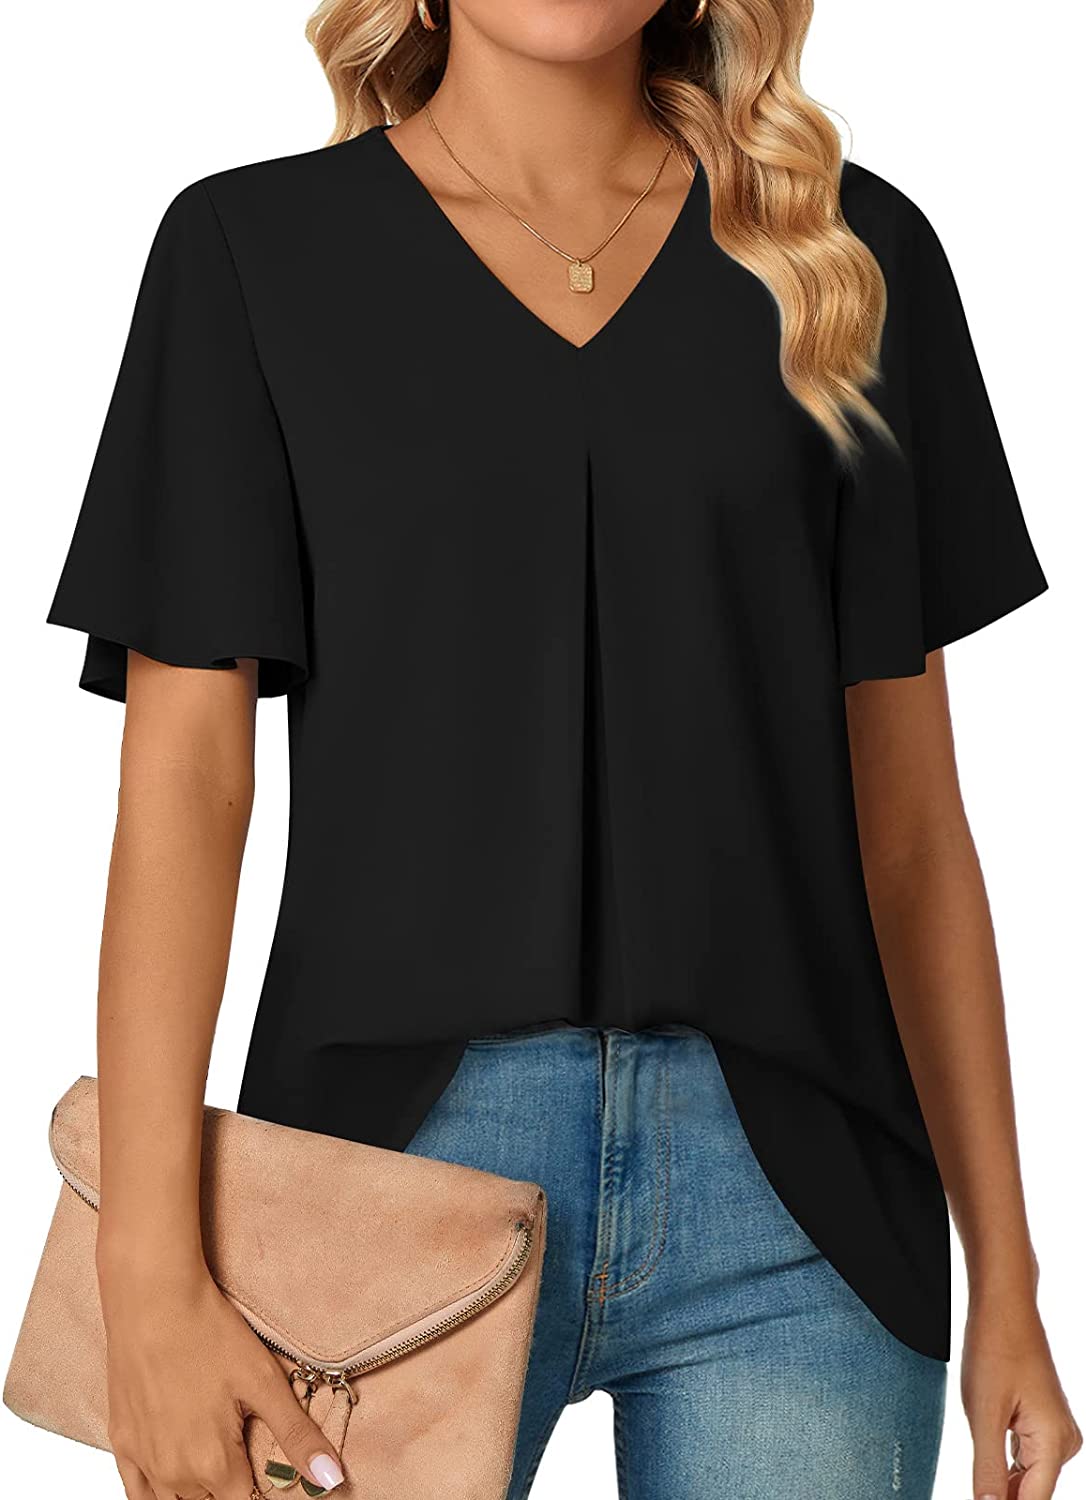 Going Out Tops, Womens Petal Sleeve Tops V Neck Short Sleeve